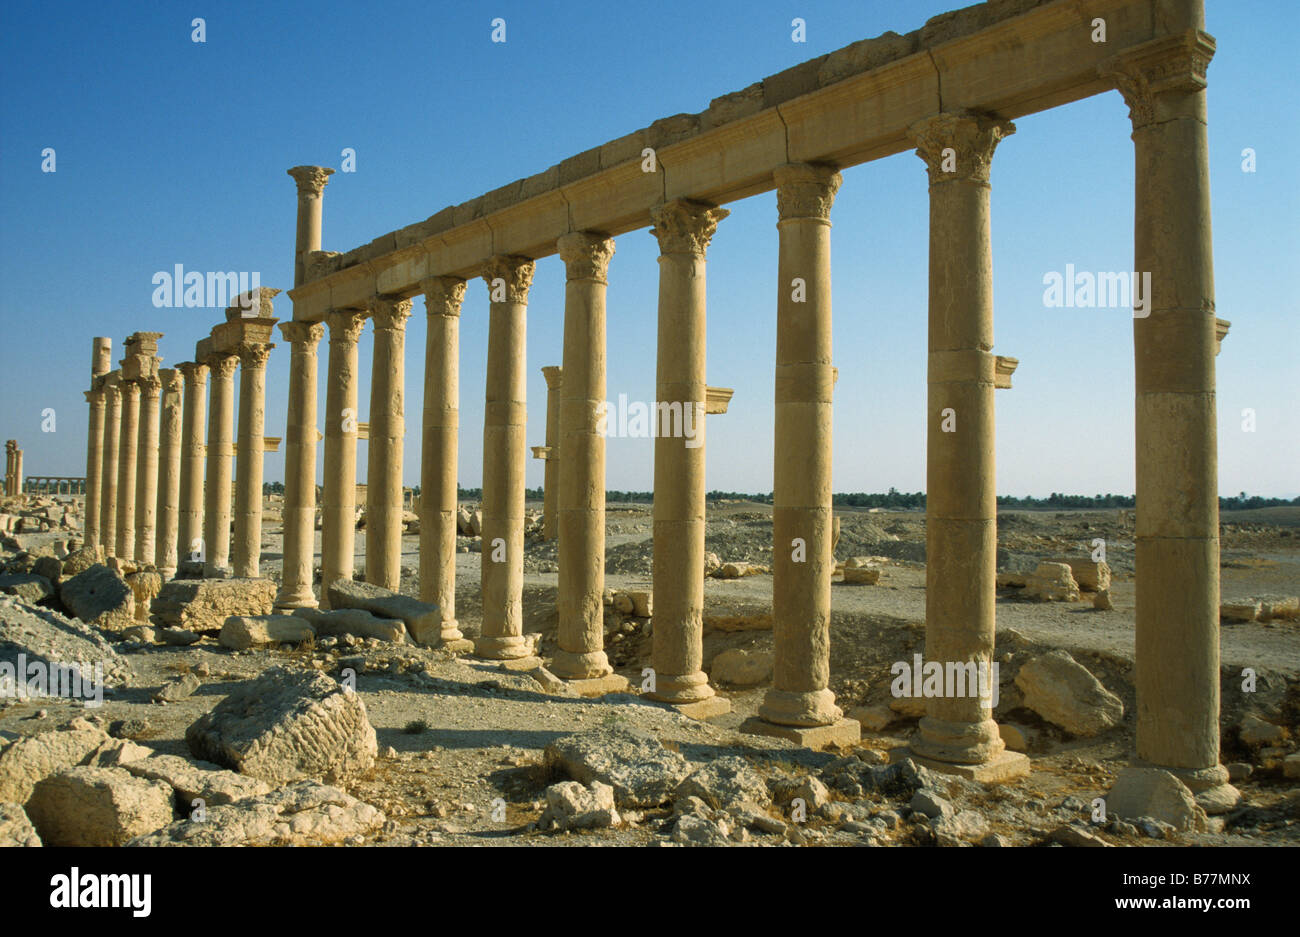 Ruins of the desert town Palmyra, Syria, Middle East, Orient Stock Photo